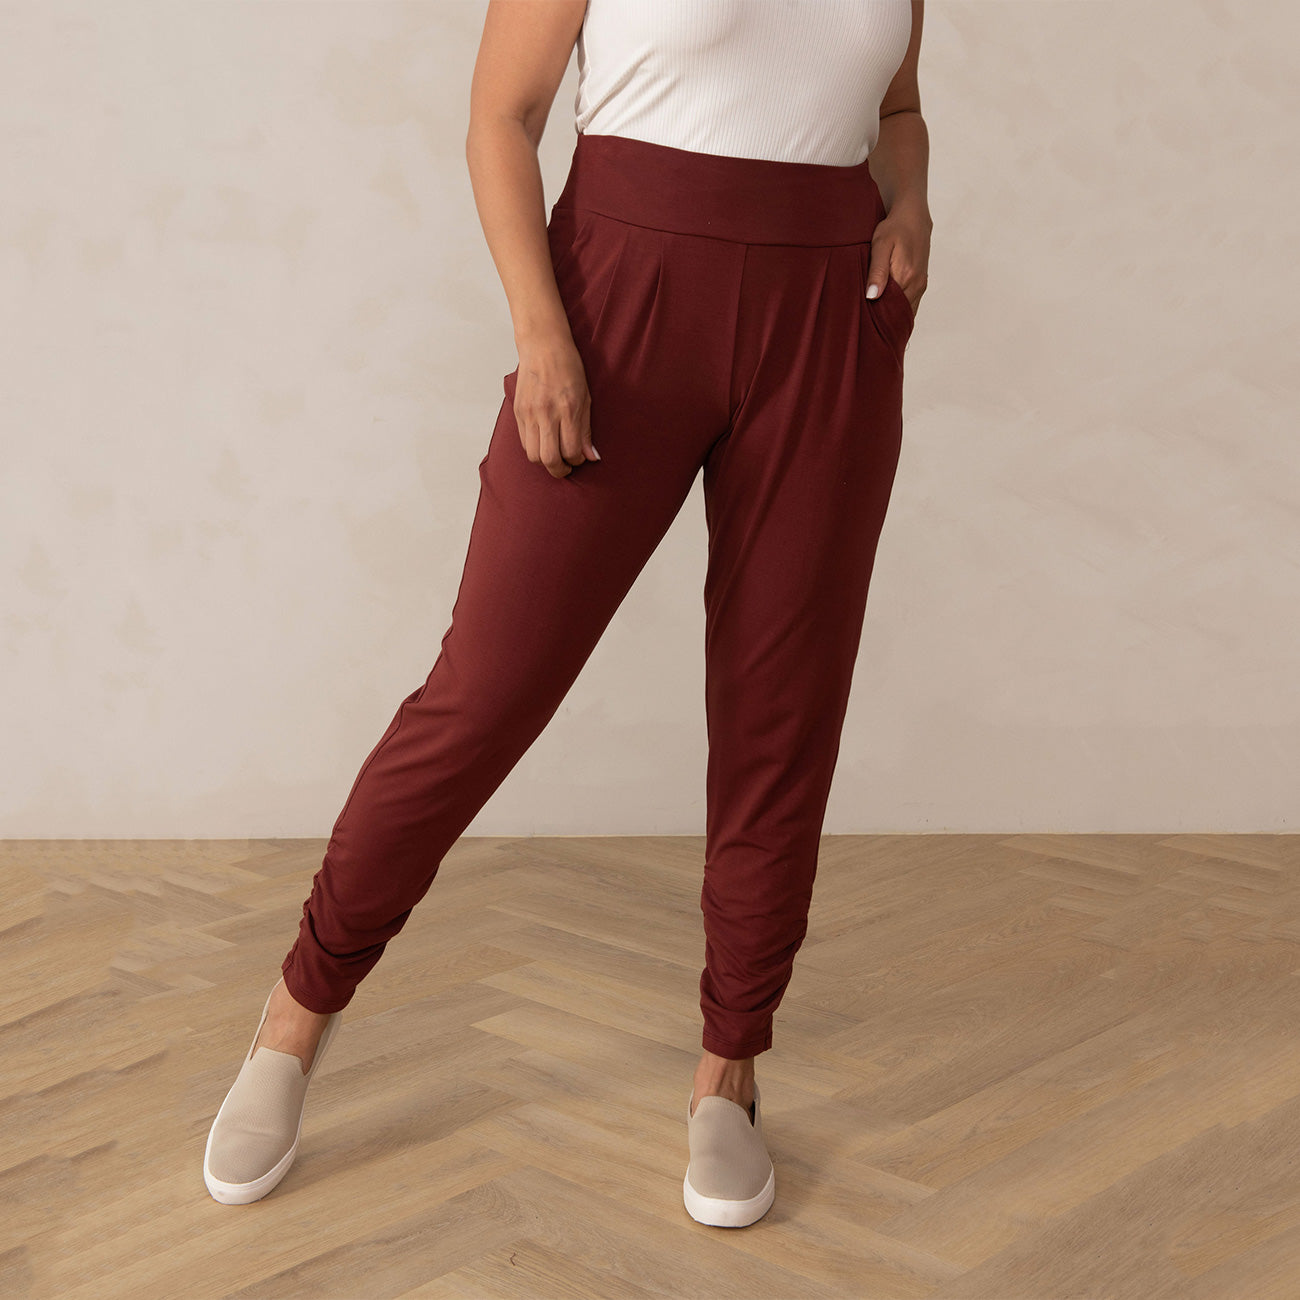 The Best Ways to Shop for Girls Joggers: how to find the best